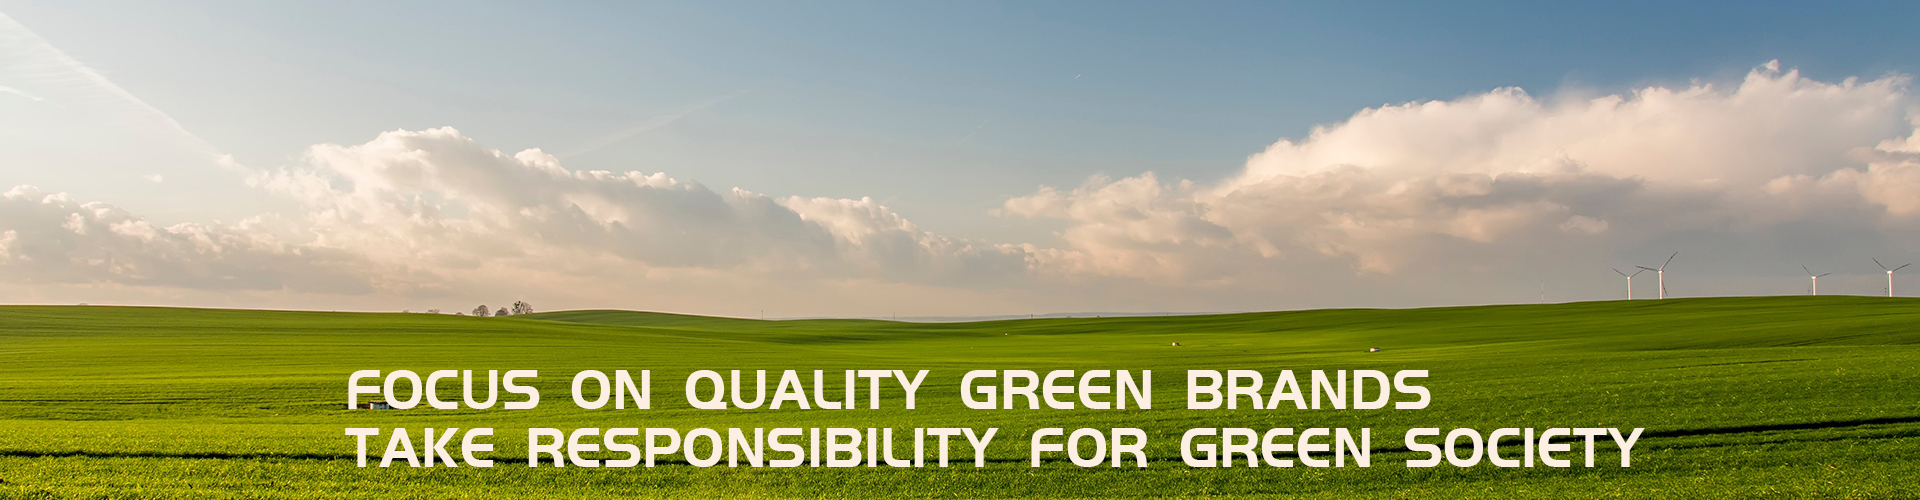 FOCUS ON QUALITY GREEN BRANDS TAKE RESPANSIBILITY FOR GREEN SOCIETY